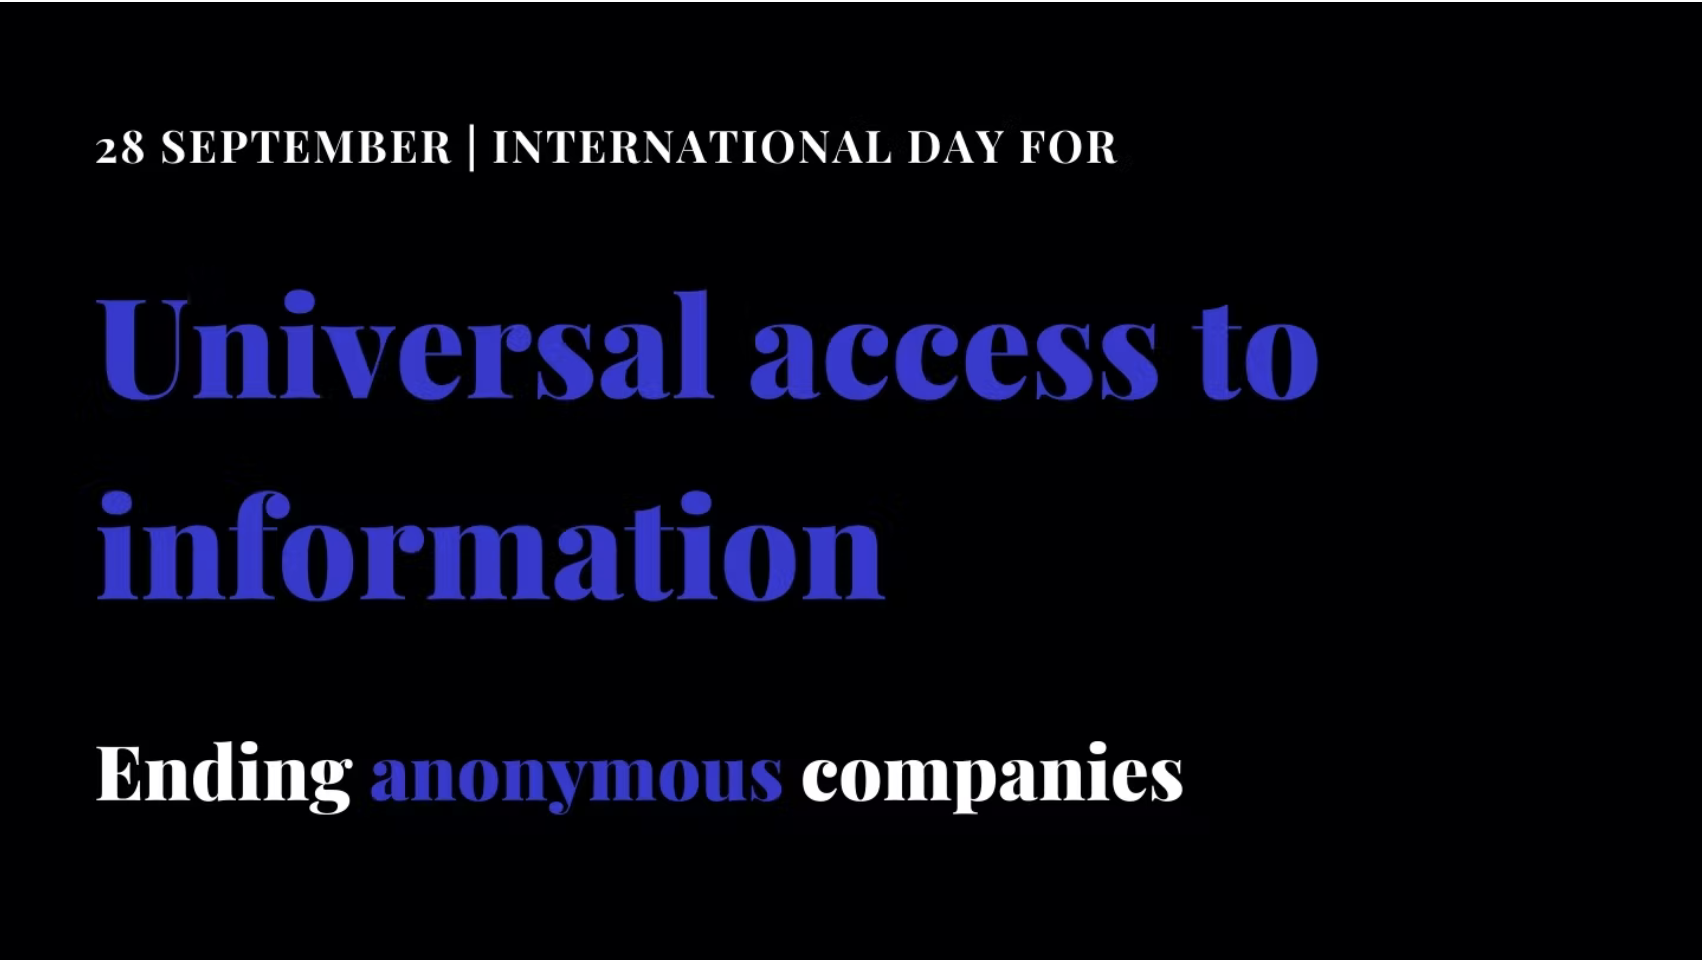 access to information day